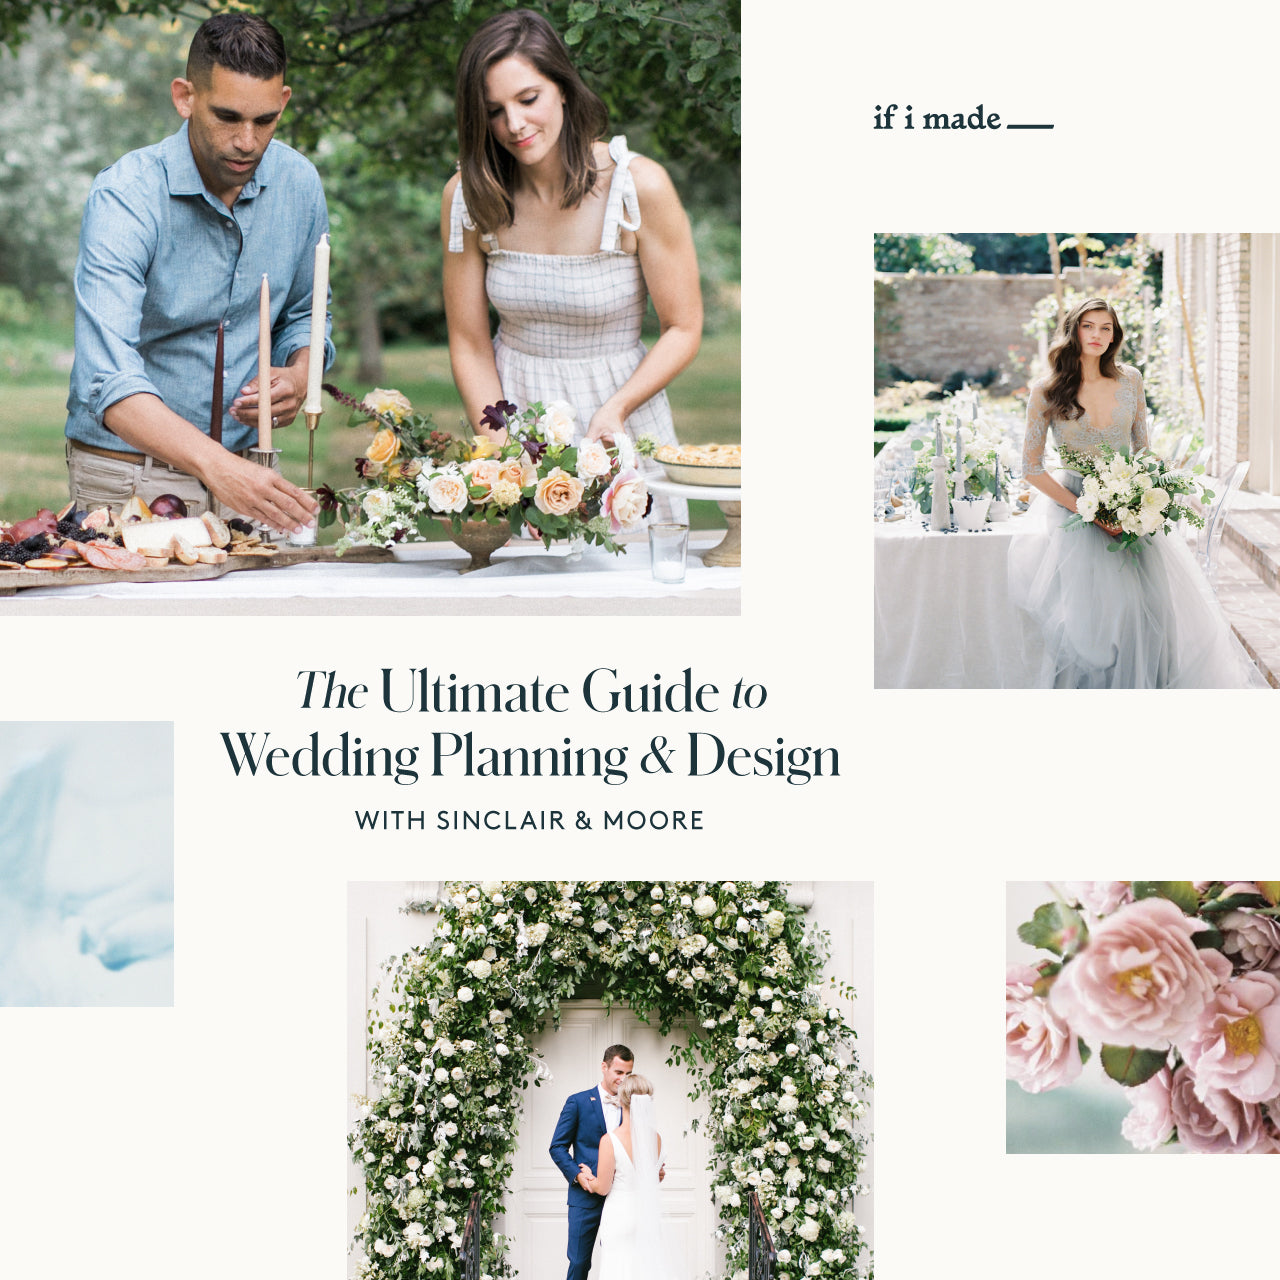 The Ultimate Guide to Wedding Planning & Design with Sinclair & Moore (ESPP0321) - 26 payments of $69